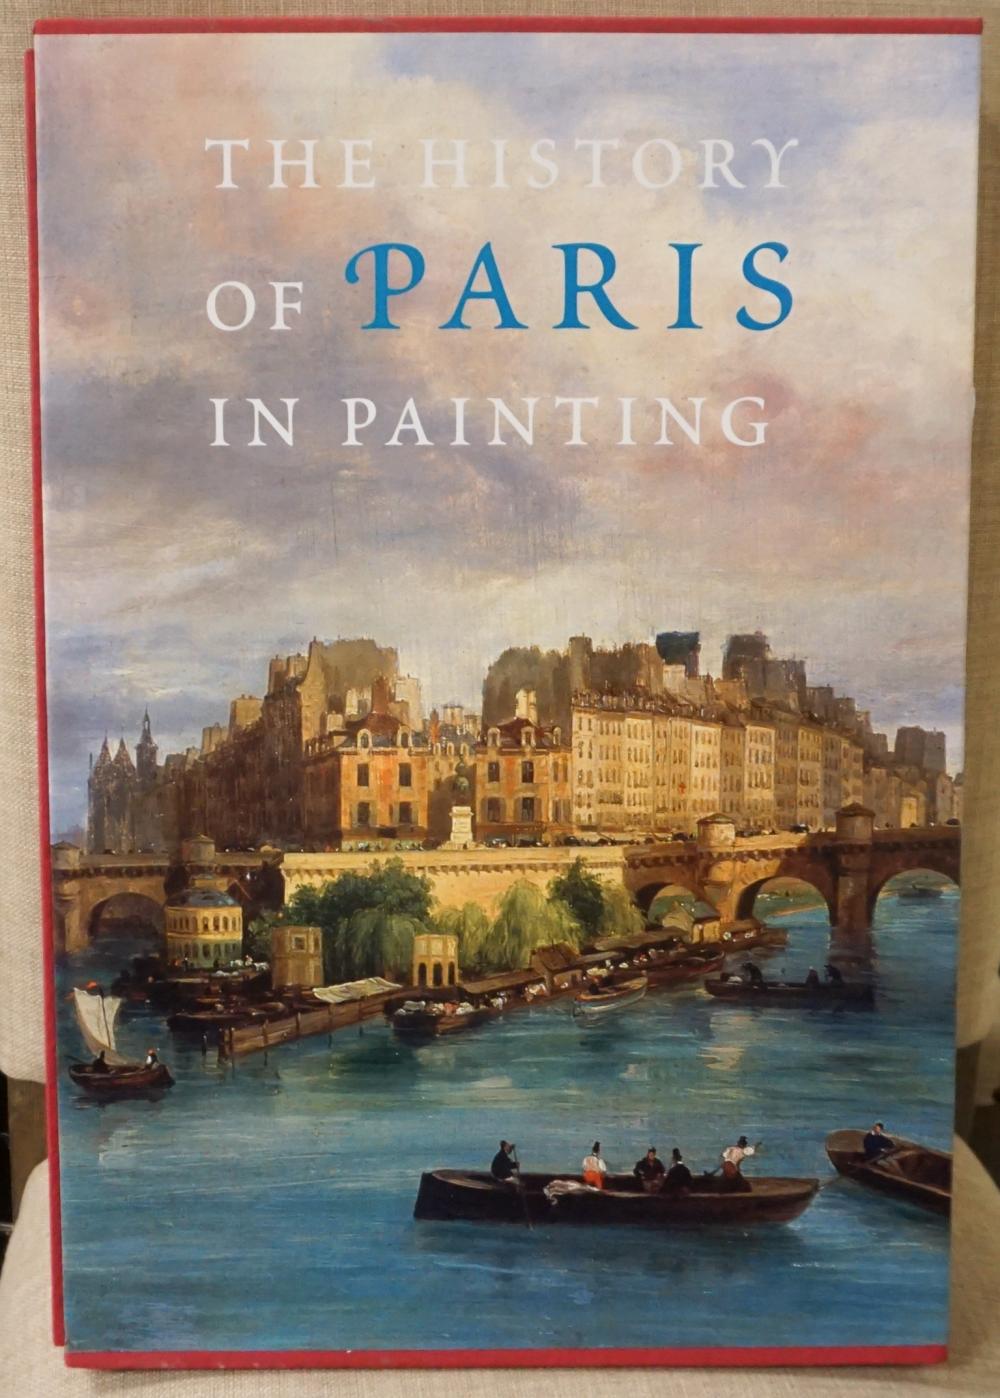 THE HISTORY OF PARIS IN PAINTINGS, ONE